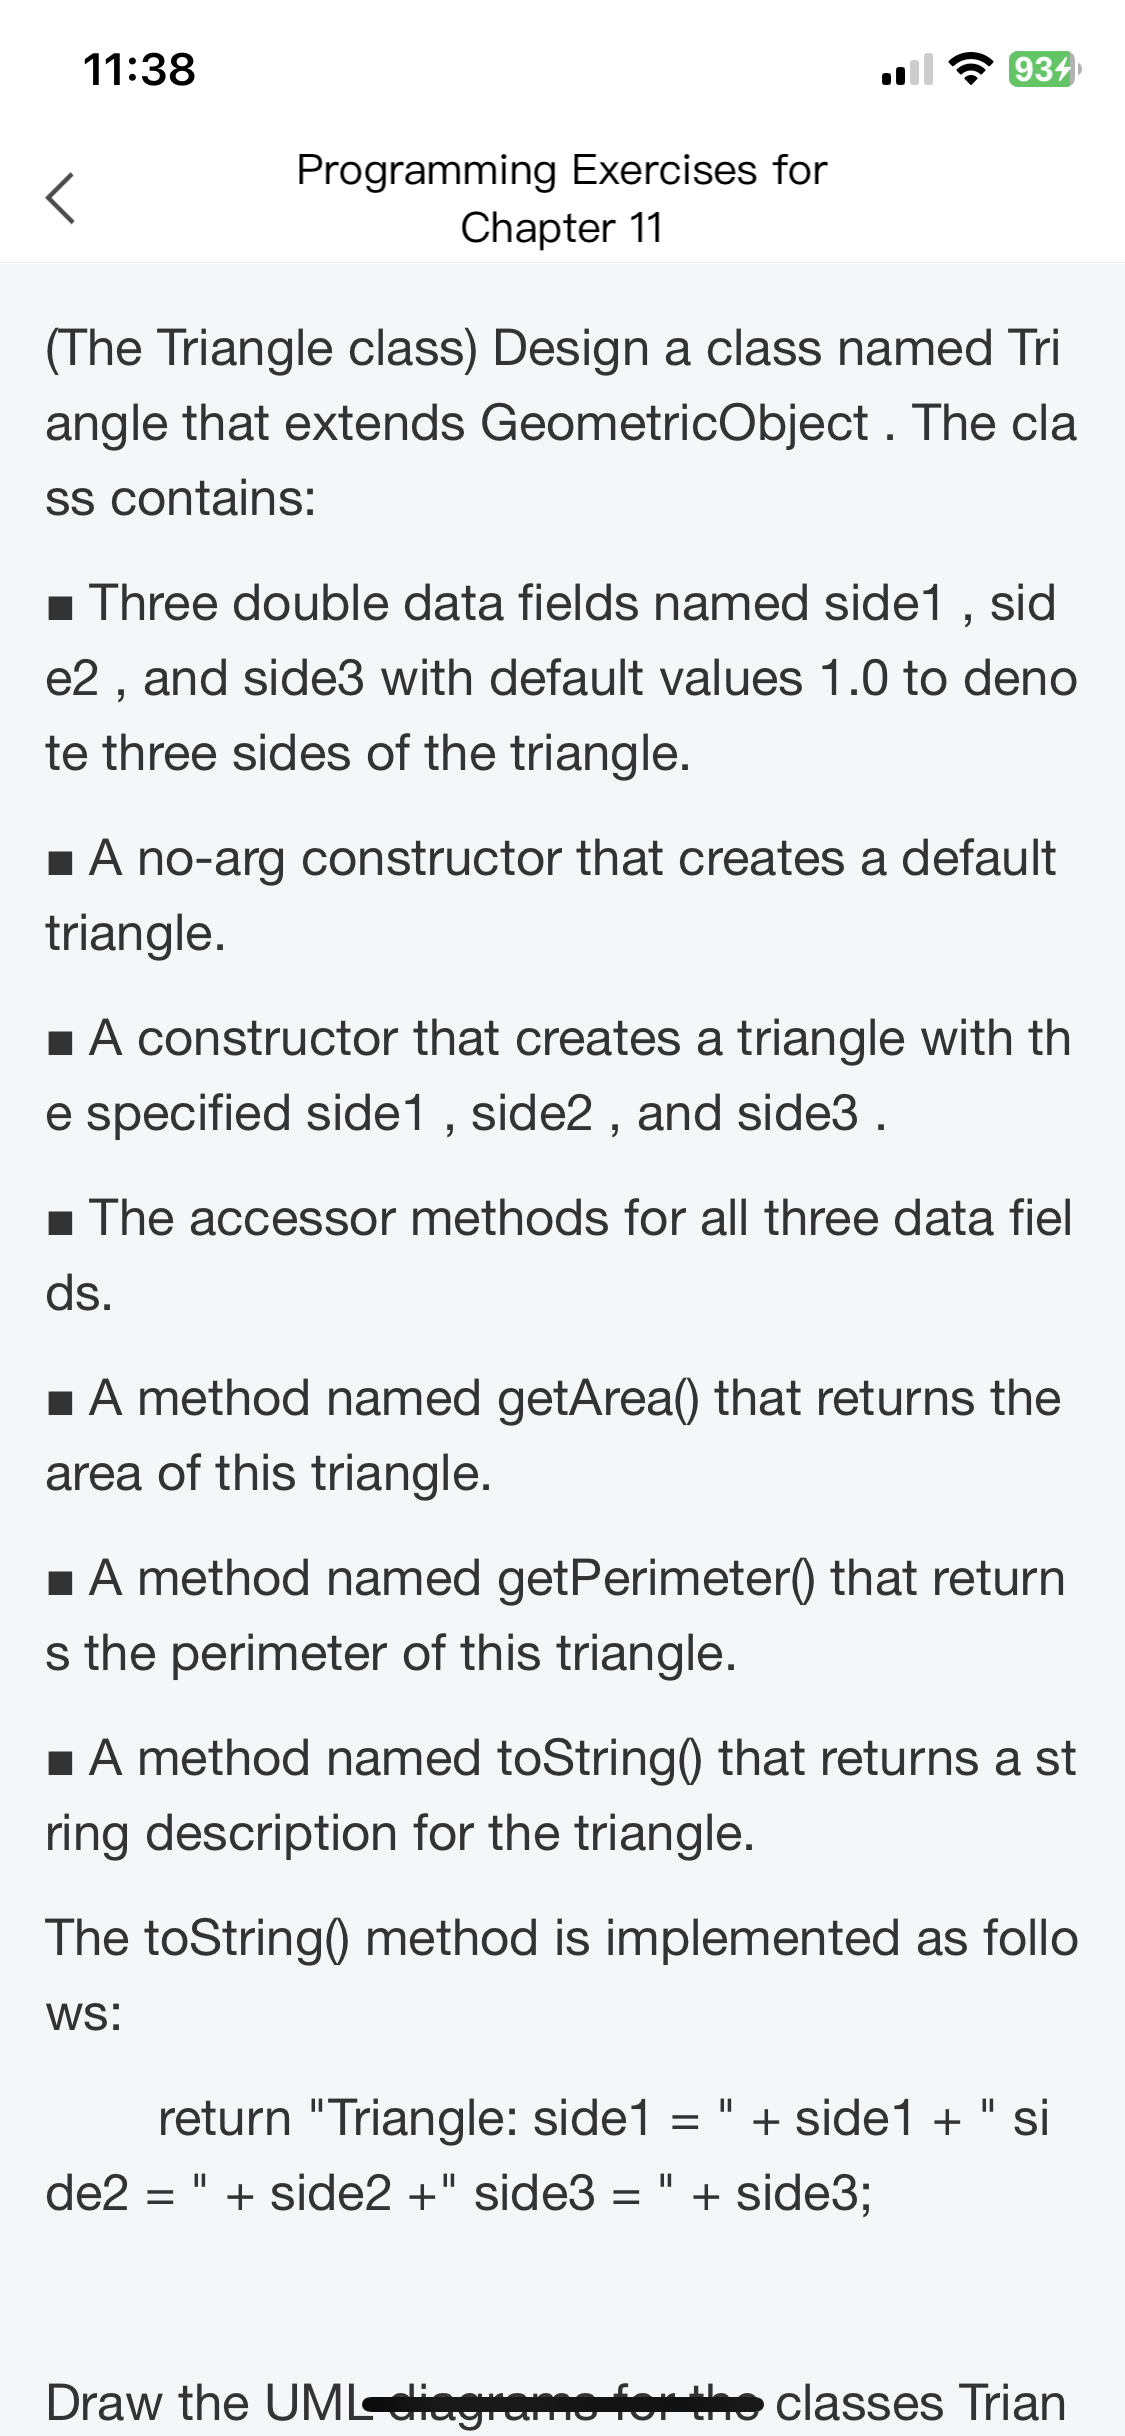 11:38
Programming Exercises for
Chapter 11
934
(The Triangle class) Design a class named Tri
angle that extends GeometricObject. The cla
ss contains:
■ Three double data fields named side1, sid
e2, and side3 with default values 1.0 to deno
te three sides of the triangle.
■ A no-arg constructor that creates a default
triangle.
■ A constructor that creates a triangle with th
e specified side1, side2, and side3.
■ The accessor methods for all three data fiel
ds.
■ A method named getArea() that returns the
area of this triangle.
■ A method named getPerimeter() that return
s the perimeter of this triangle.
■ A method named toString() that returns a st
ring description for the triangle.
The toString() method is implemented as follo
WS:
return "Triangle: side1 = " + side1+" si
de2 = " + side2 +" side3 = " + side3;
Draw the UML-eliagrams for the classes Trian